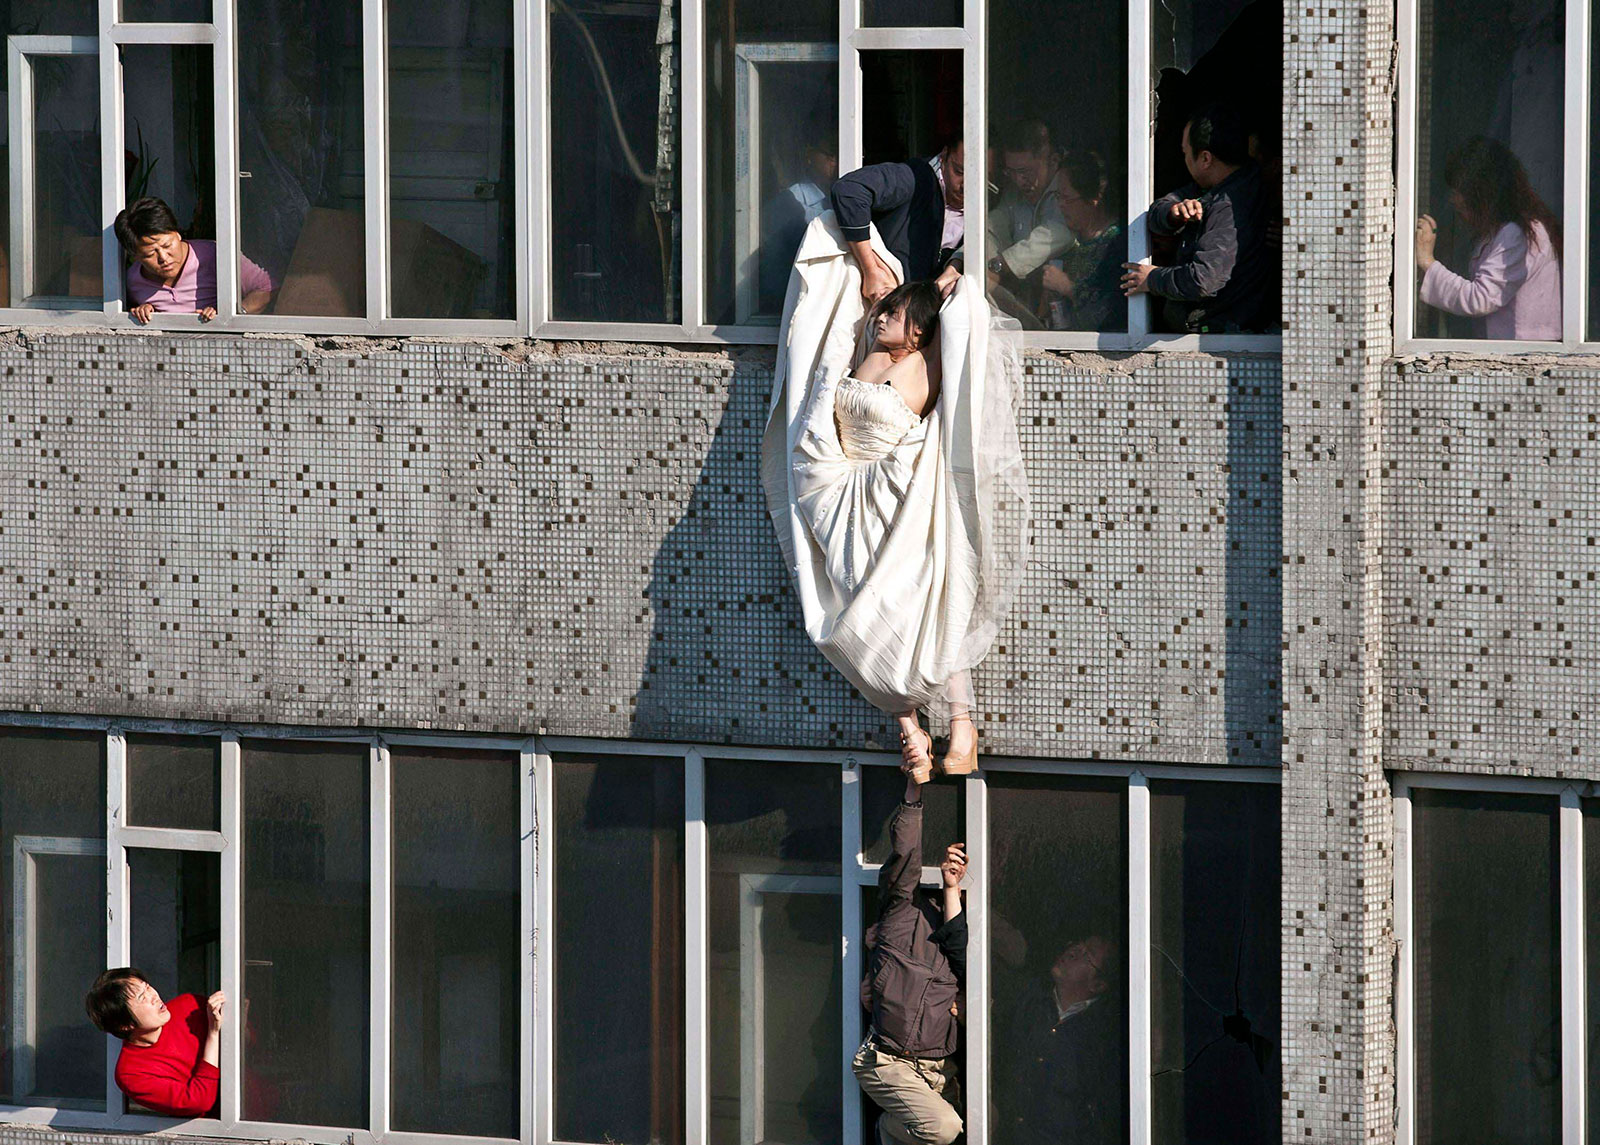 A distressed bride attempts suicide in China after her fiance abruptly called off their marriage. Still in her wedding gown, she tried to kill herself by jumping out of a window of a seventh floor building. Right as she jumped, a man managed to catch and save her.